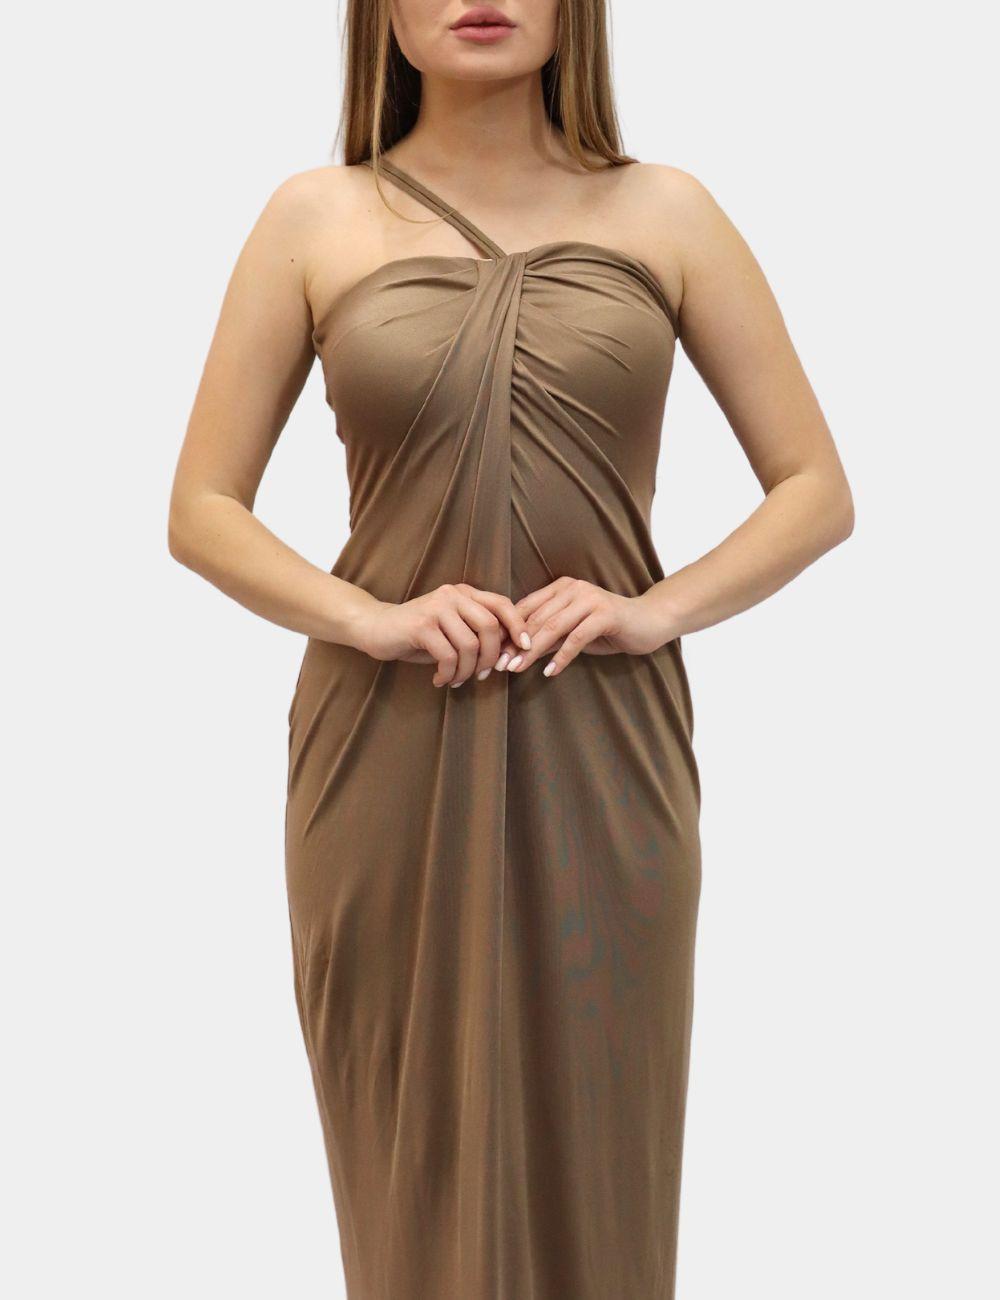 Max Mara Jersey Dress, Features maxi length, and halter straps.

Material: Silk
Size: EU 36 / IT 40
Bust: 90cm
Waist: 82cm
Hip: 110
Condition: Light stain